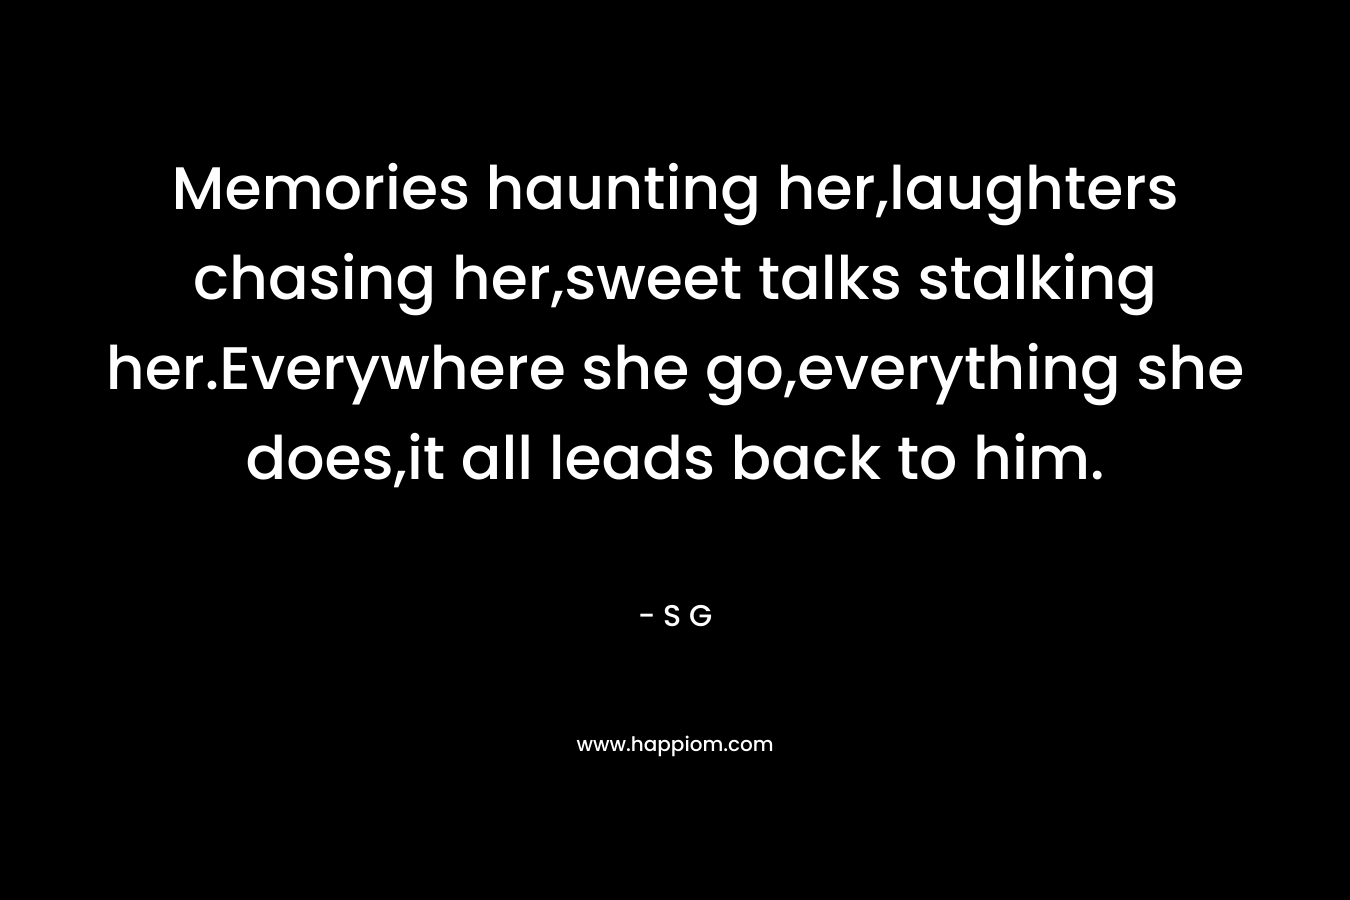 Memories haunting her,laughters chasing her,sweet talks stalking her.Everywhere she go,everything she does,it all leads back to him. – S G